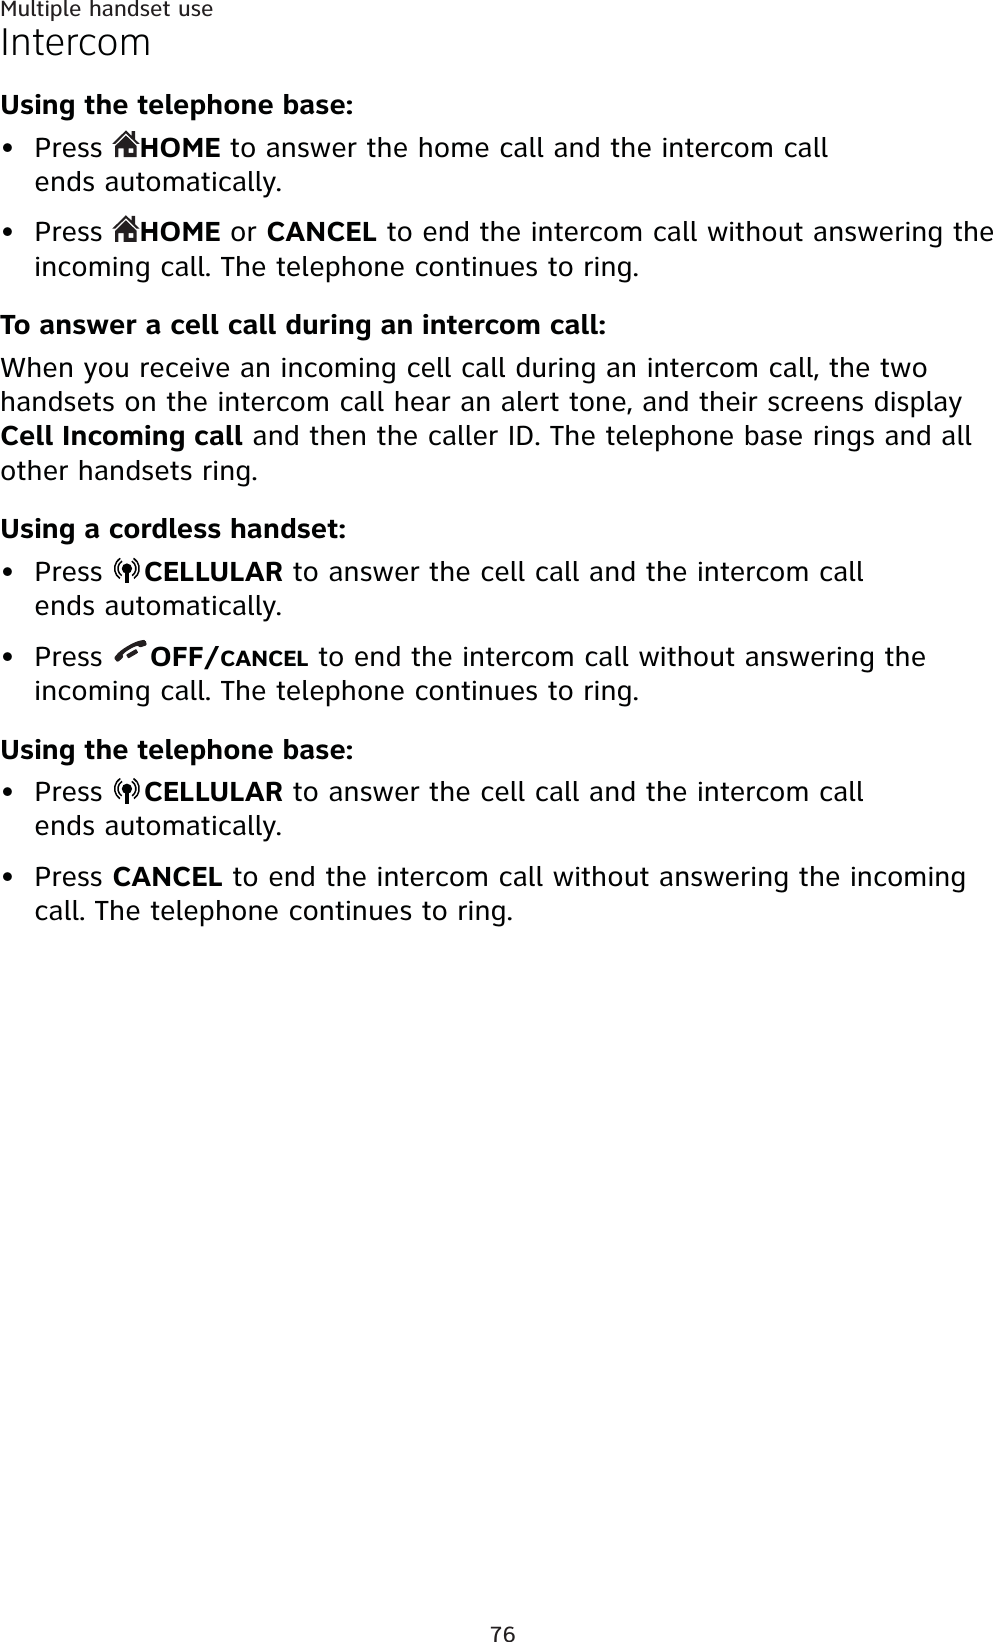 76Multiple handset useIntercomUsing the telephone base:Press  HOME to answer the home call and the intercom call ends automatically.Press  HOME or CANCEL to end the intercom call without answering the incoming call. The telephone continues to ring.To answer a cell call during an intercom call:When you receive an incoming cell call during an intercom call, the two handsets on the intercom call hear an alert tone, and their screens displayCell Incoming call and then the caller ID. The telephone base rings and allother handsets ring.Using a cordless handset:Press  CELLULAR to answer the cell call and the intercom call ends automatically.Press  OFF/CANCEL to end the intercom call without answering the incoming call. The telephone continues to ring.Using the telephone base:Press  CELLULAR to answer the cell call and the intercom call ends automatically.Press CANCEL to end the intercom call without answering the incoming call. The telephone continues to ring.••••••